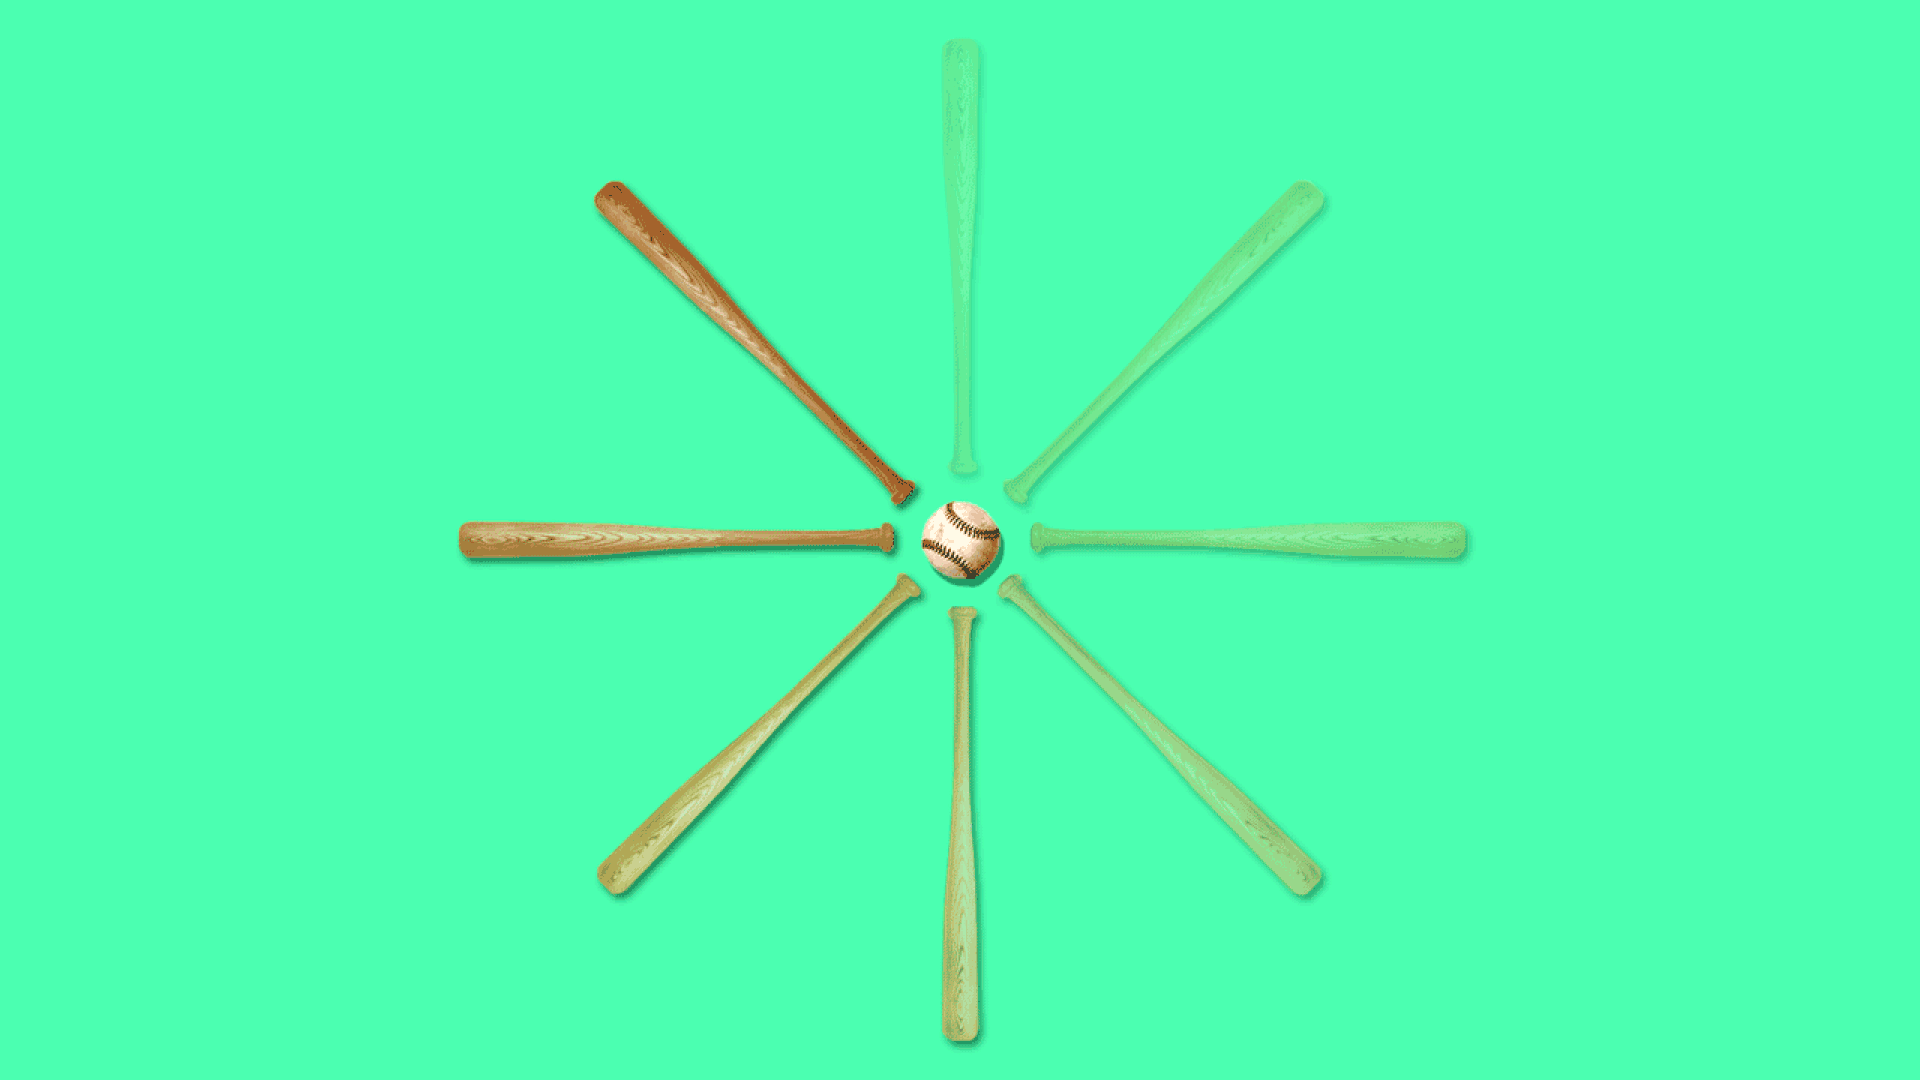 Animated illustration of a loading icon comprised of baseball bats and a baseball